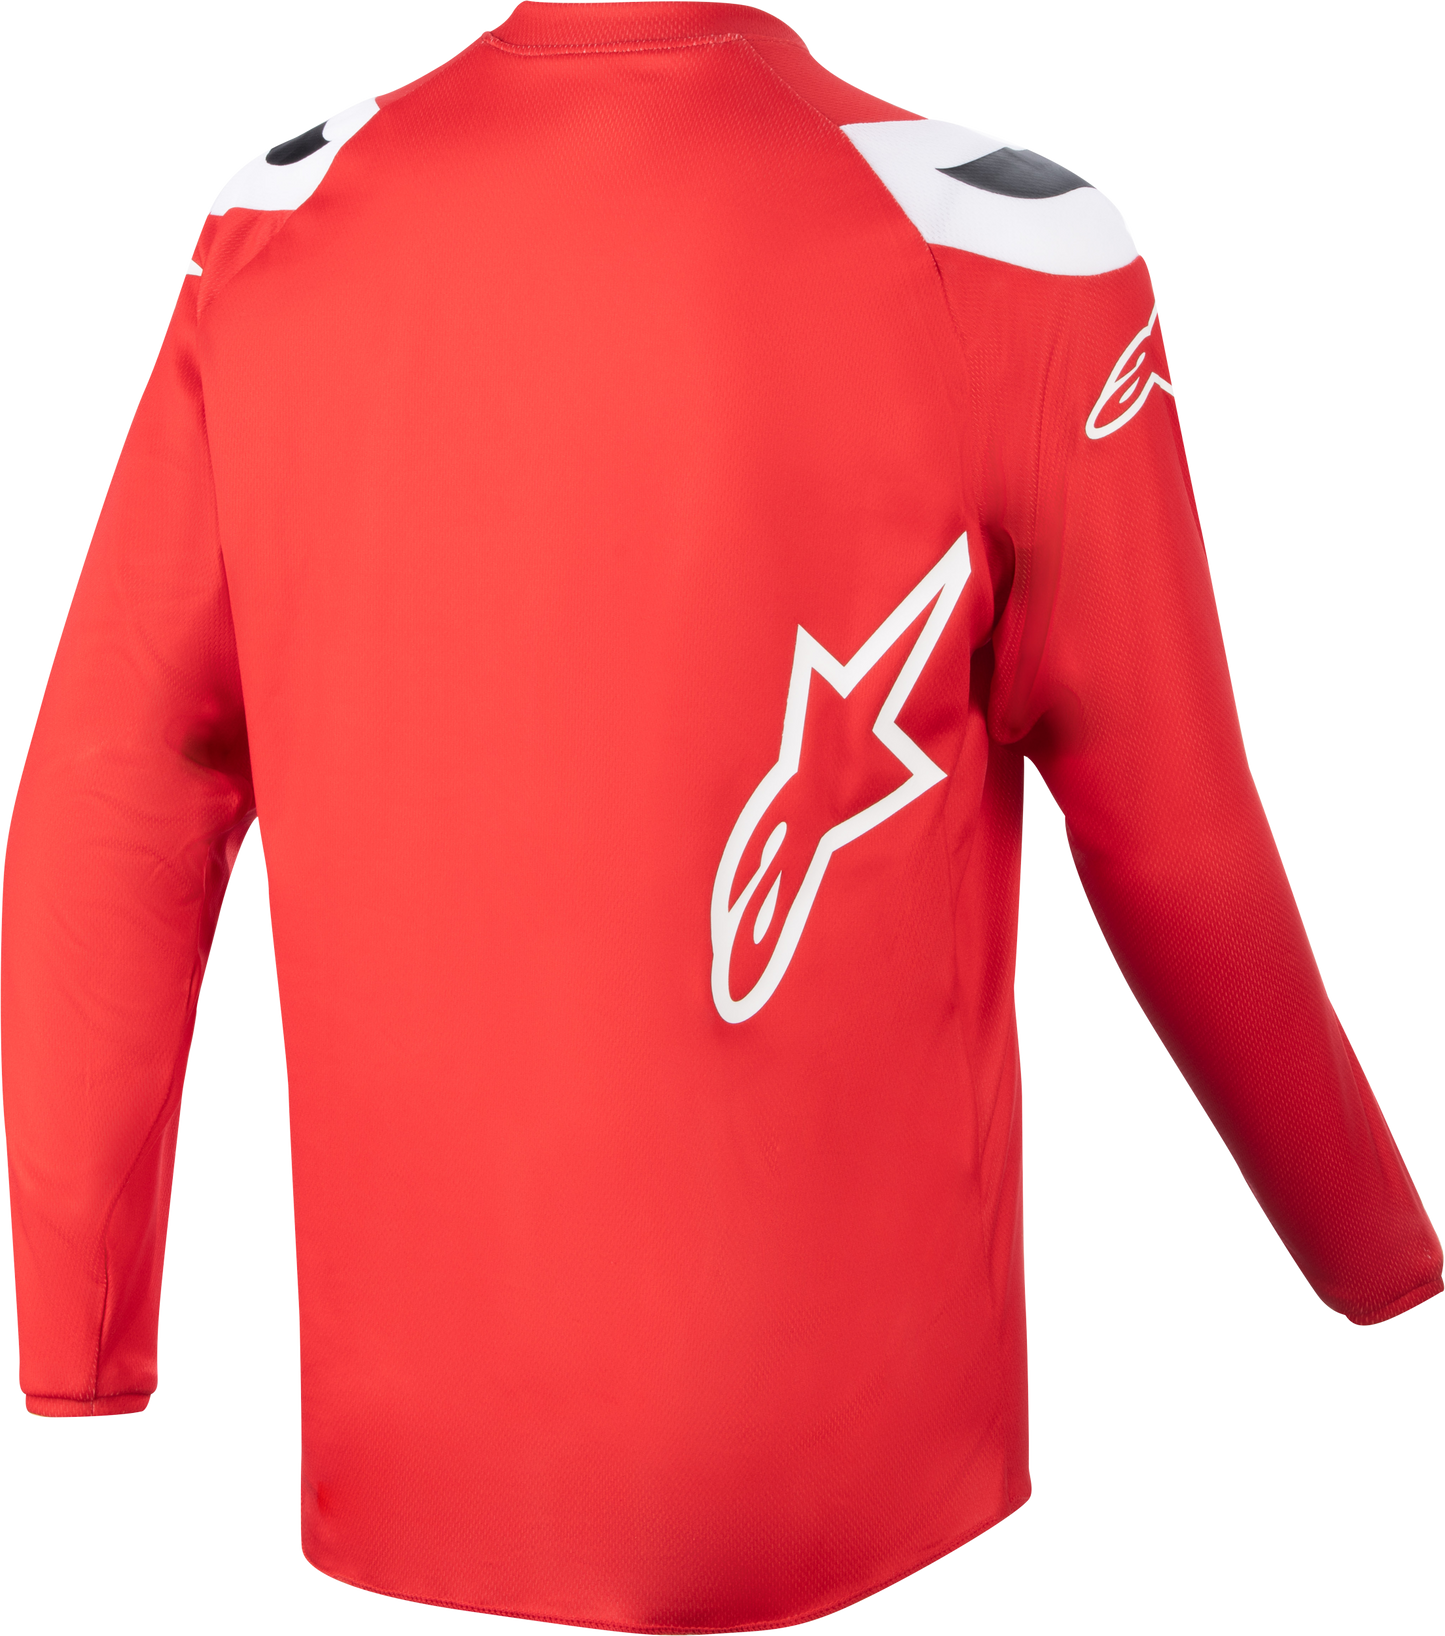 YOUTH RACER NARIN JERSEY MARS RED/WHITE